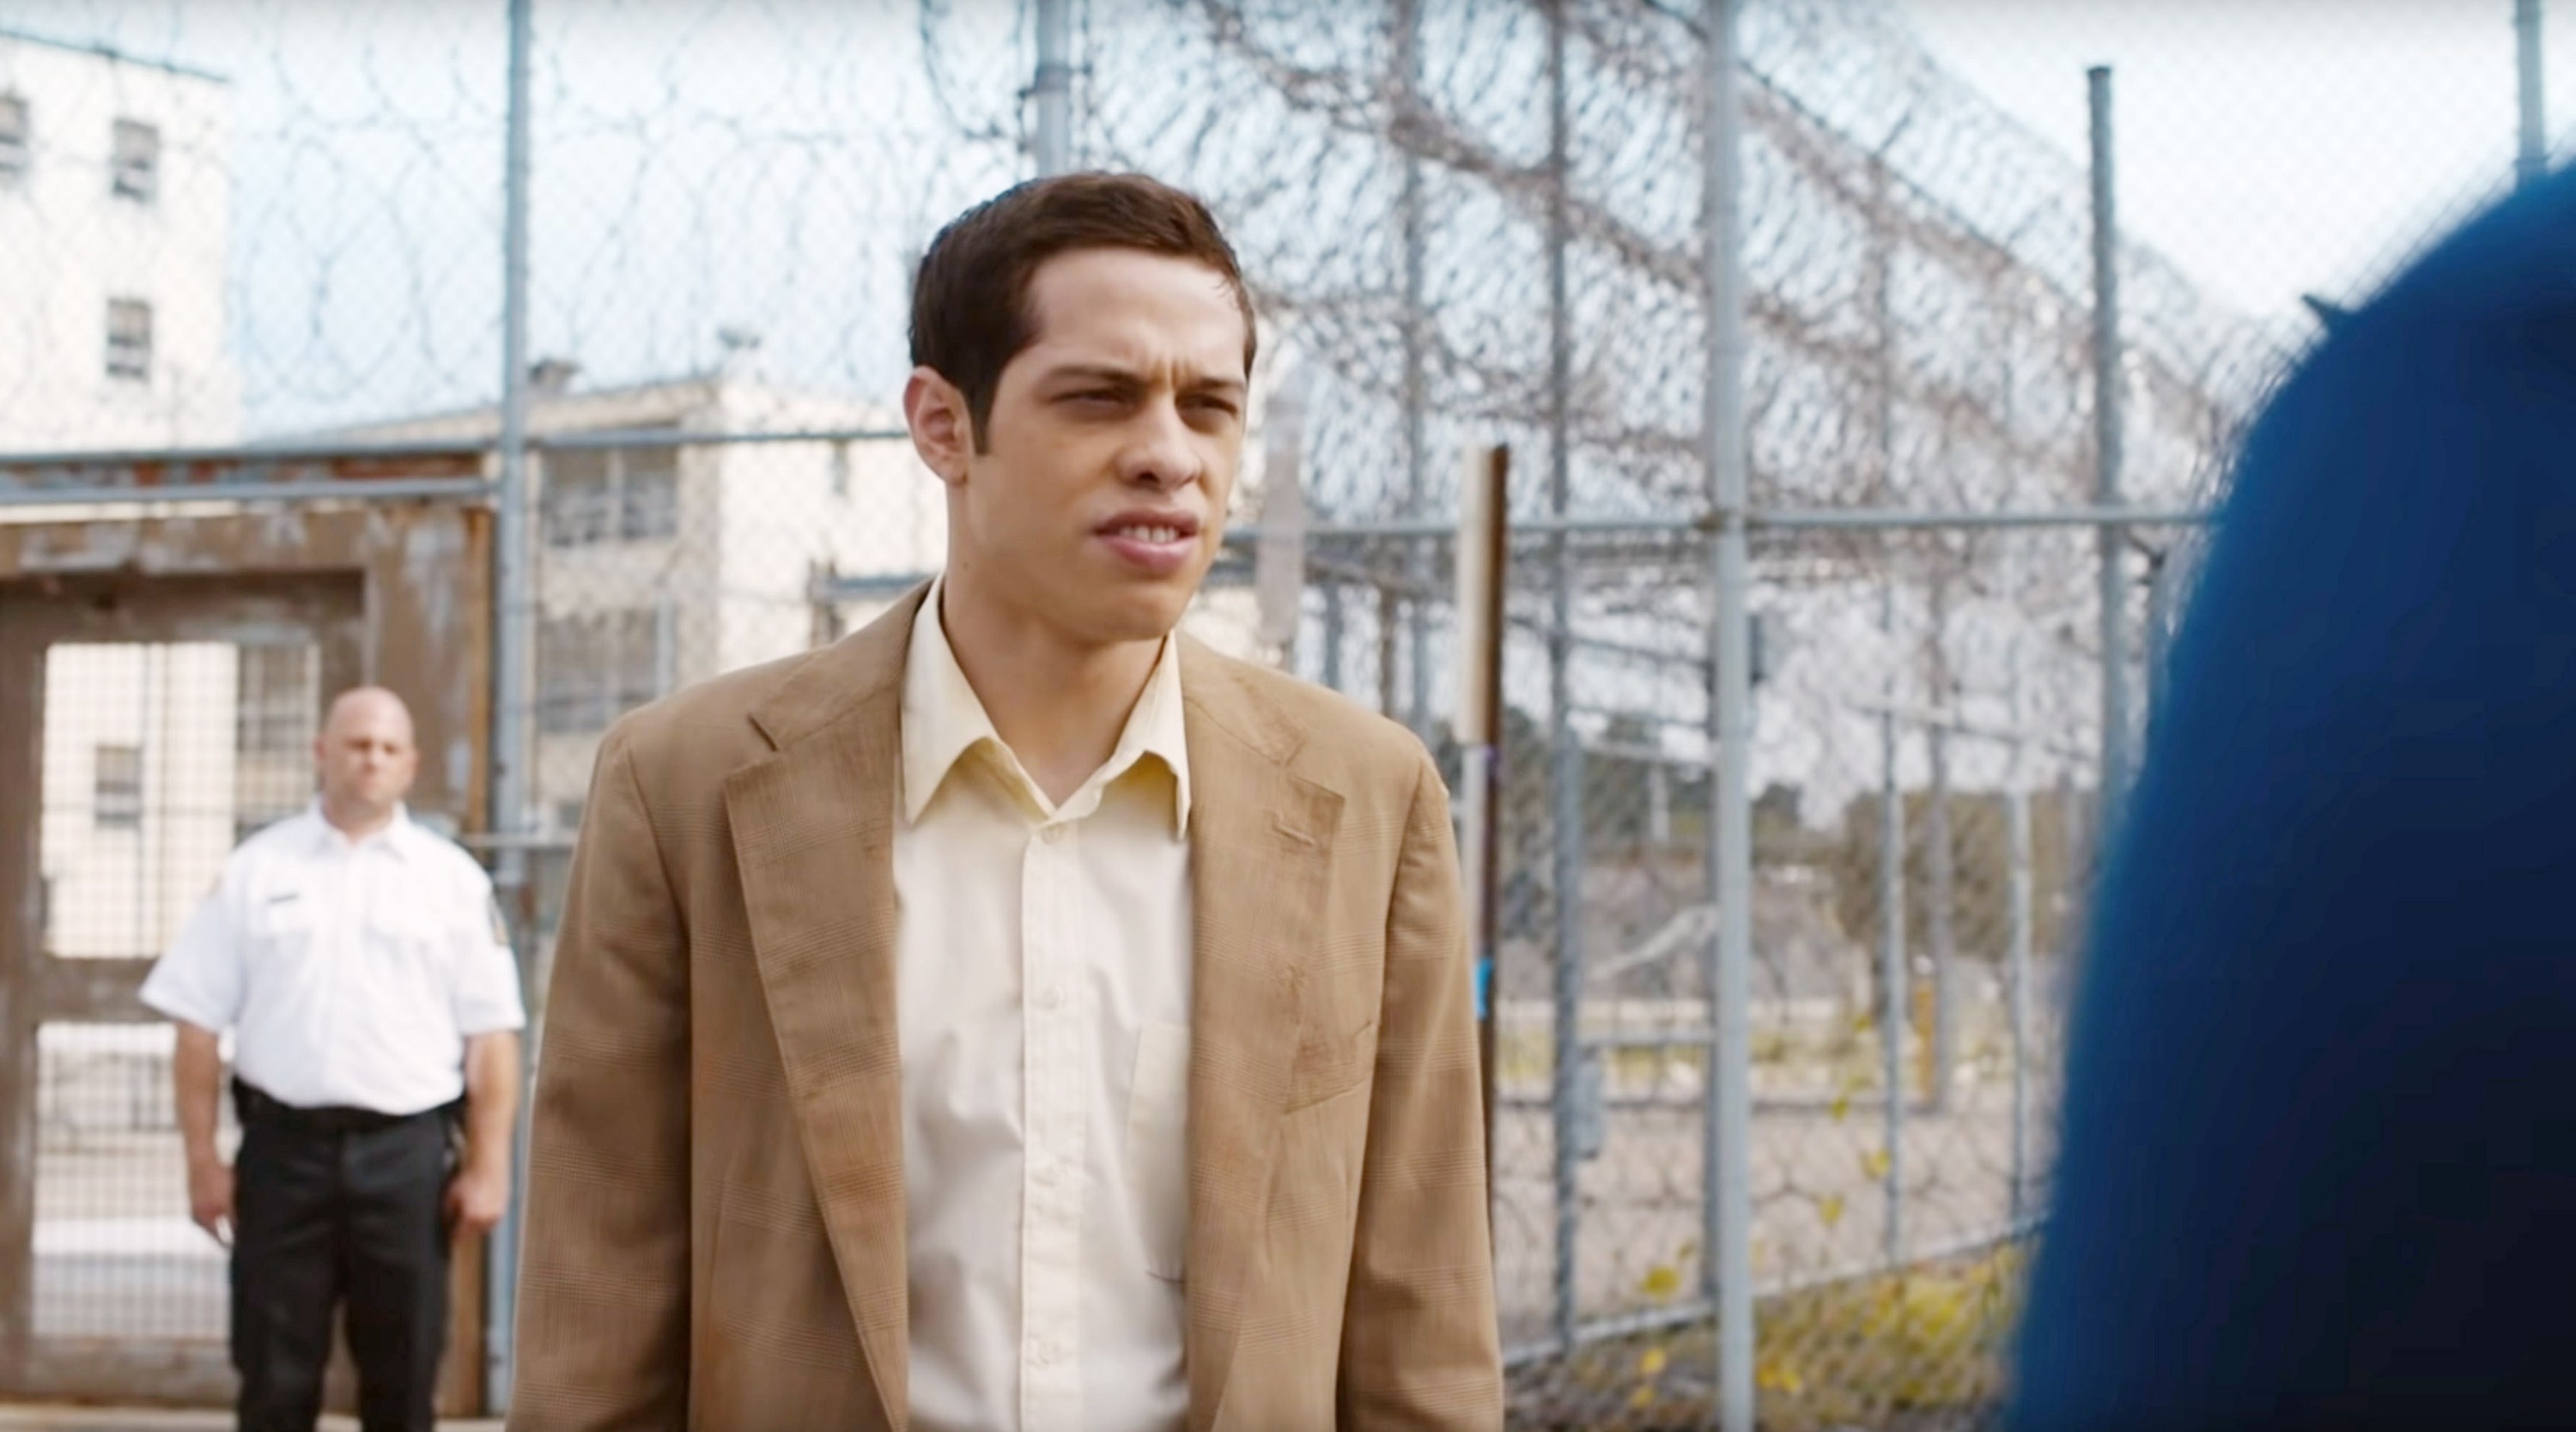 Pete in a jacket and shirt and standing outside a prison